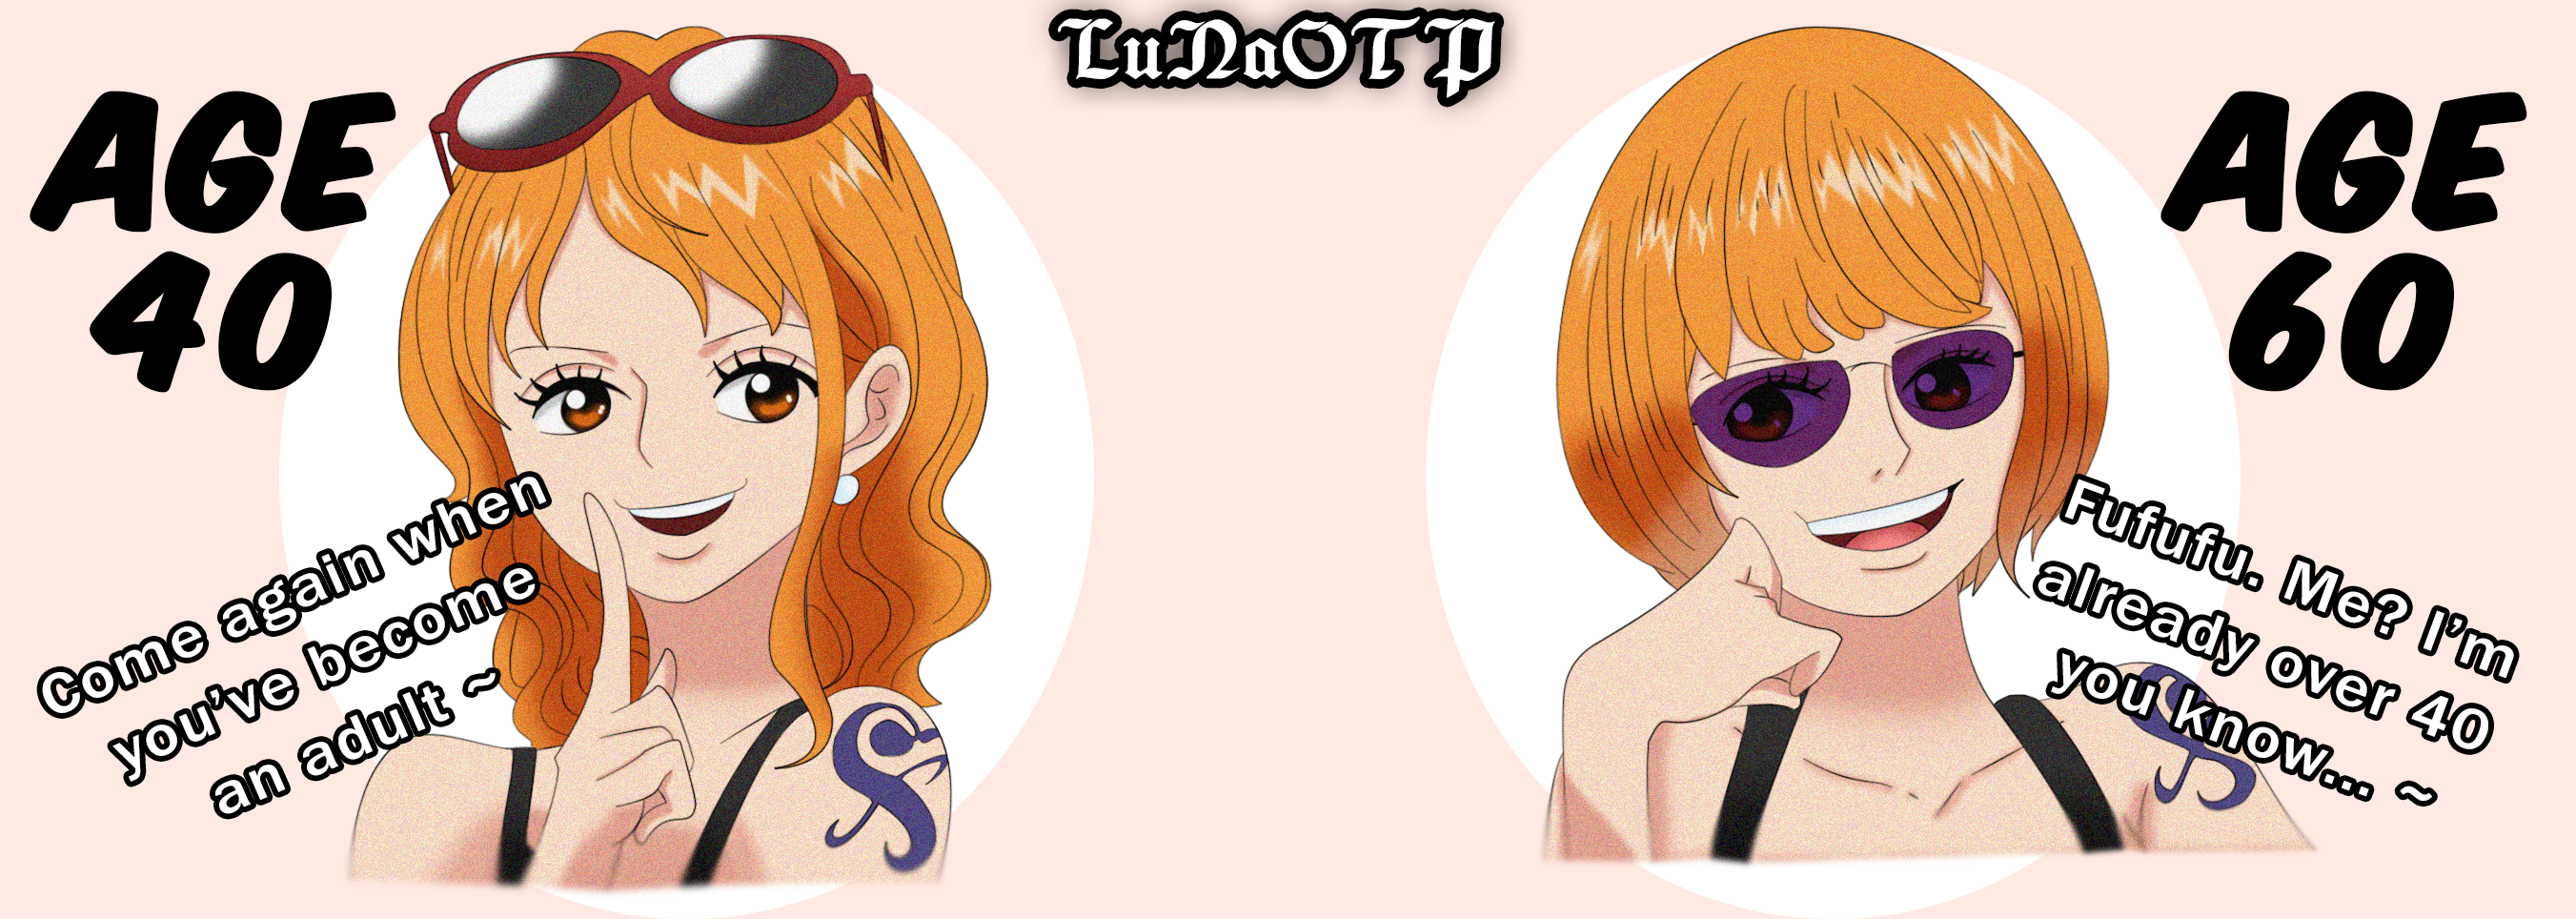 Nami Age 40 And Age 60 Coloring By Lunaotp On Deviantart